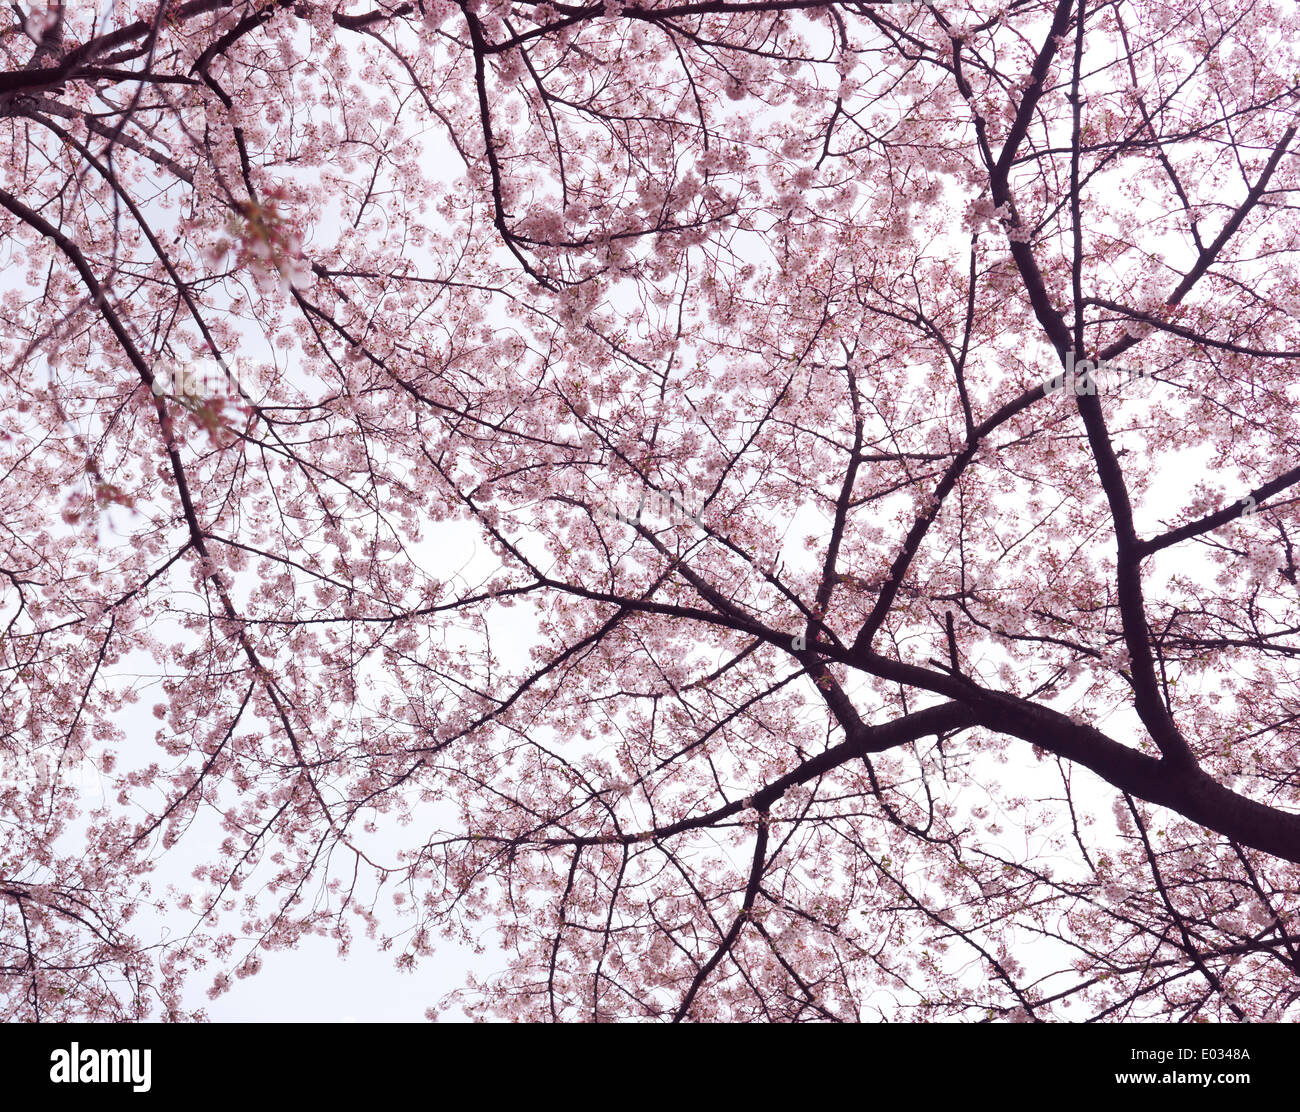 Cherry blossom on cherry trees low angle view. Tokyo, Japan. Stock Photo